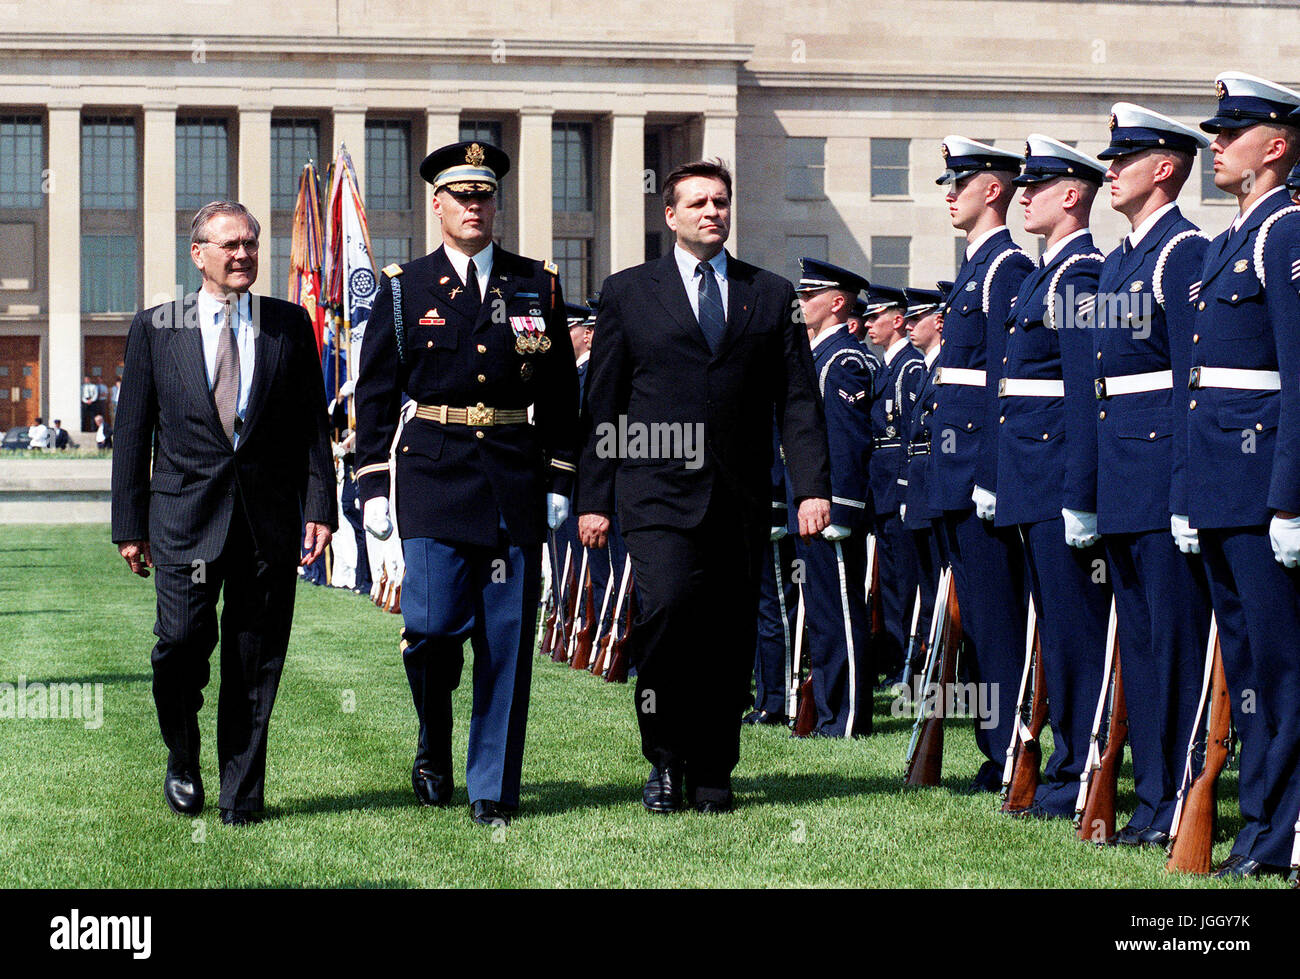 President Boris Trajkovski (right), of the Former Yugoslav Republic of Macedonia, is escorted by the Honorable Donald H. Rumsfeld (left), U.S. Secretary of Defense and U.S. Army  Col. Thomas M. Jordan (center), Commander of Troops, during an inspection of the ceremonial honor guard at the Pentagon on May 2, 2001. Stock Photo